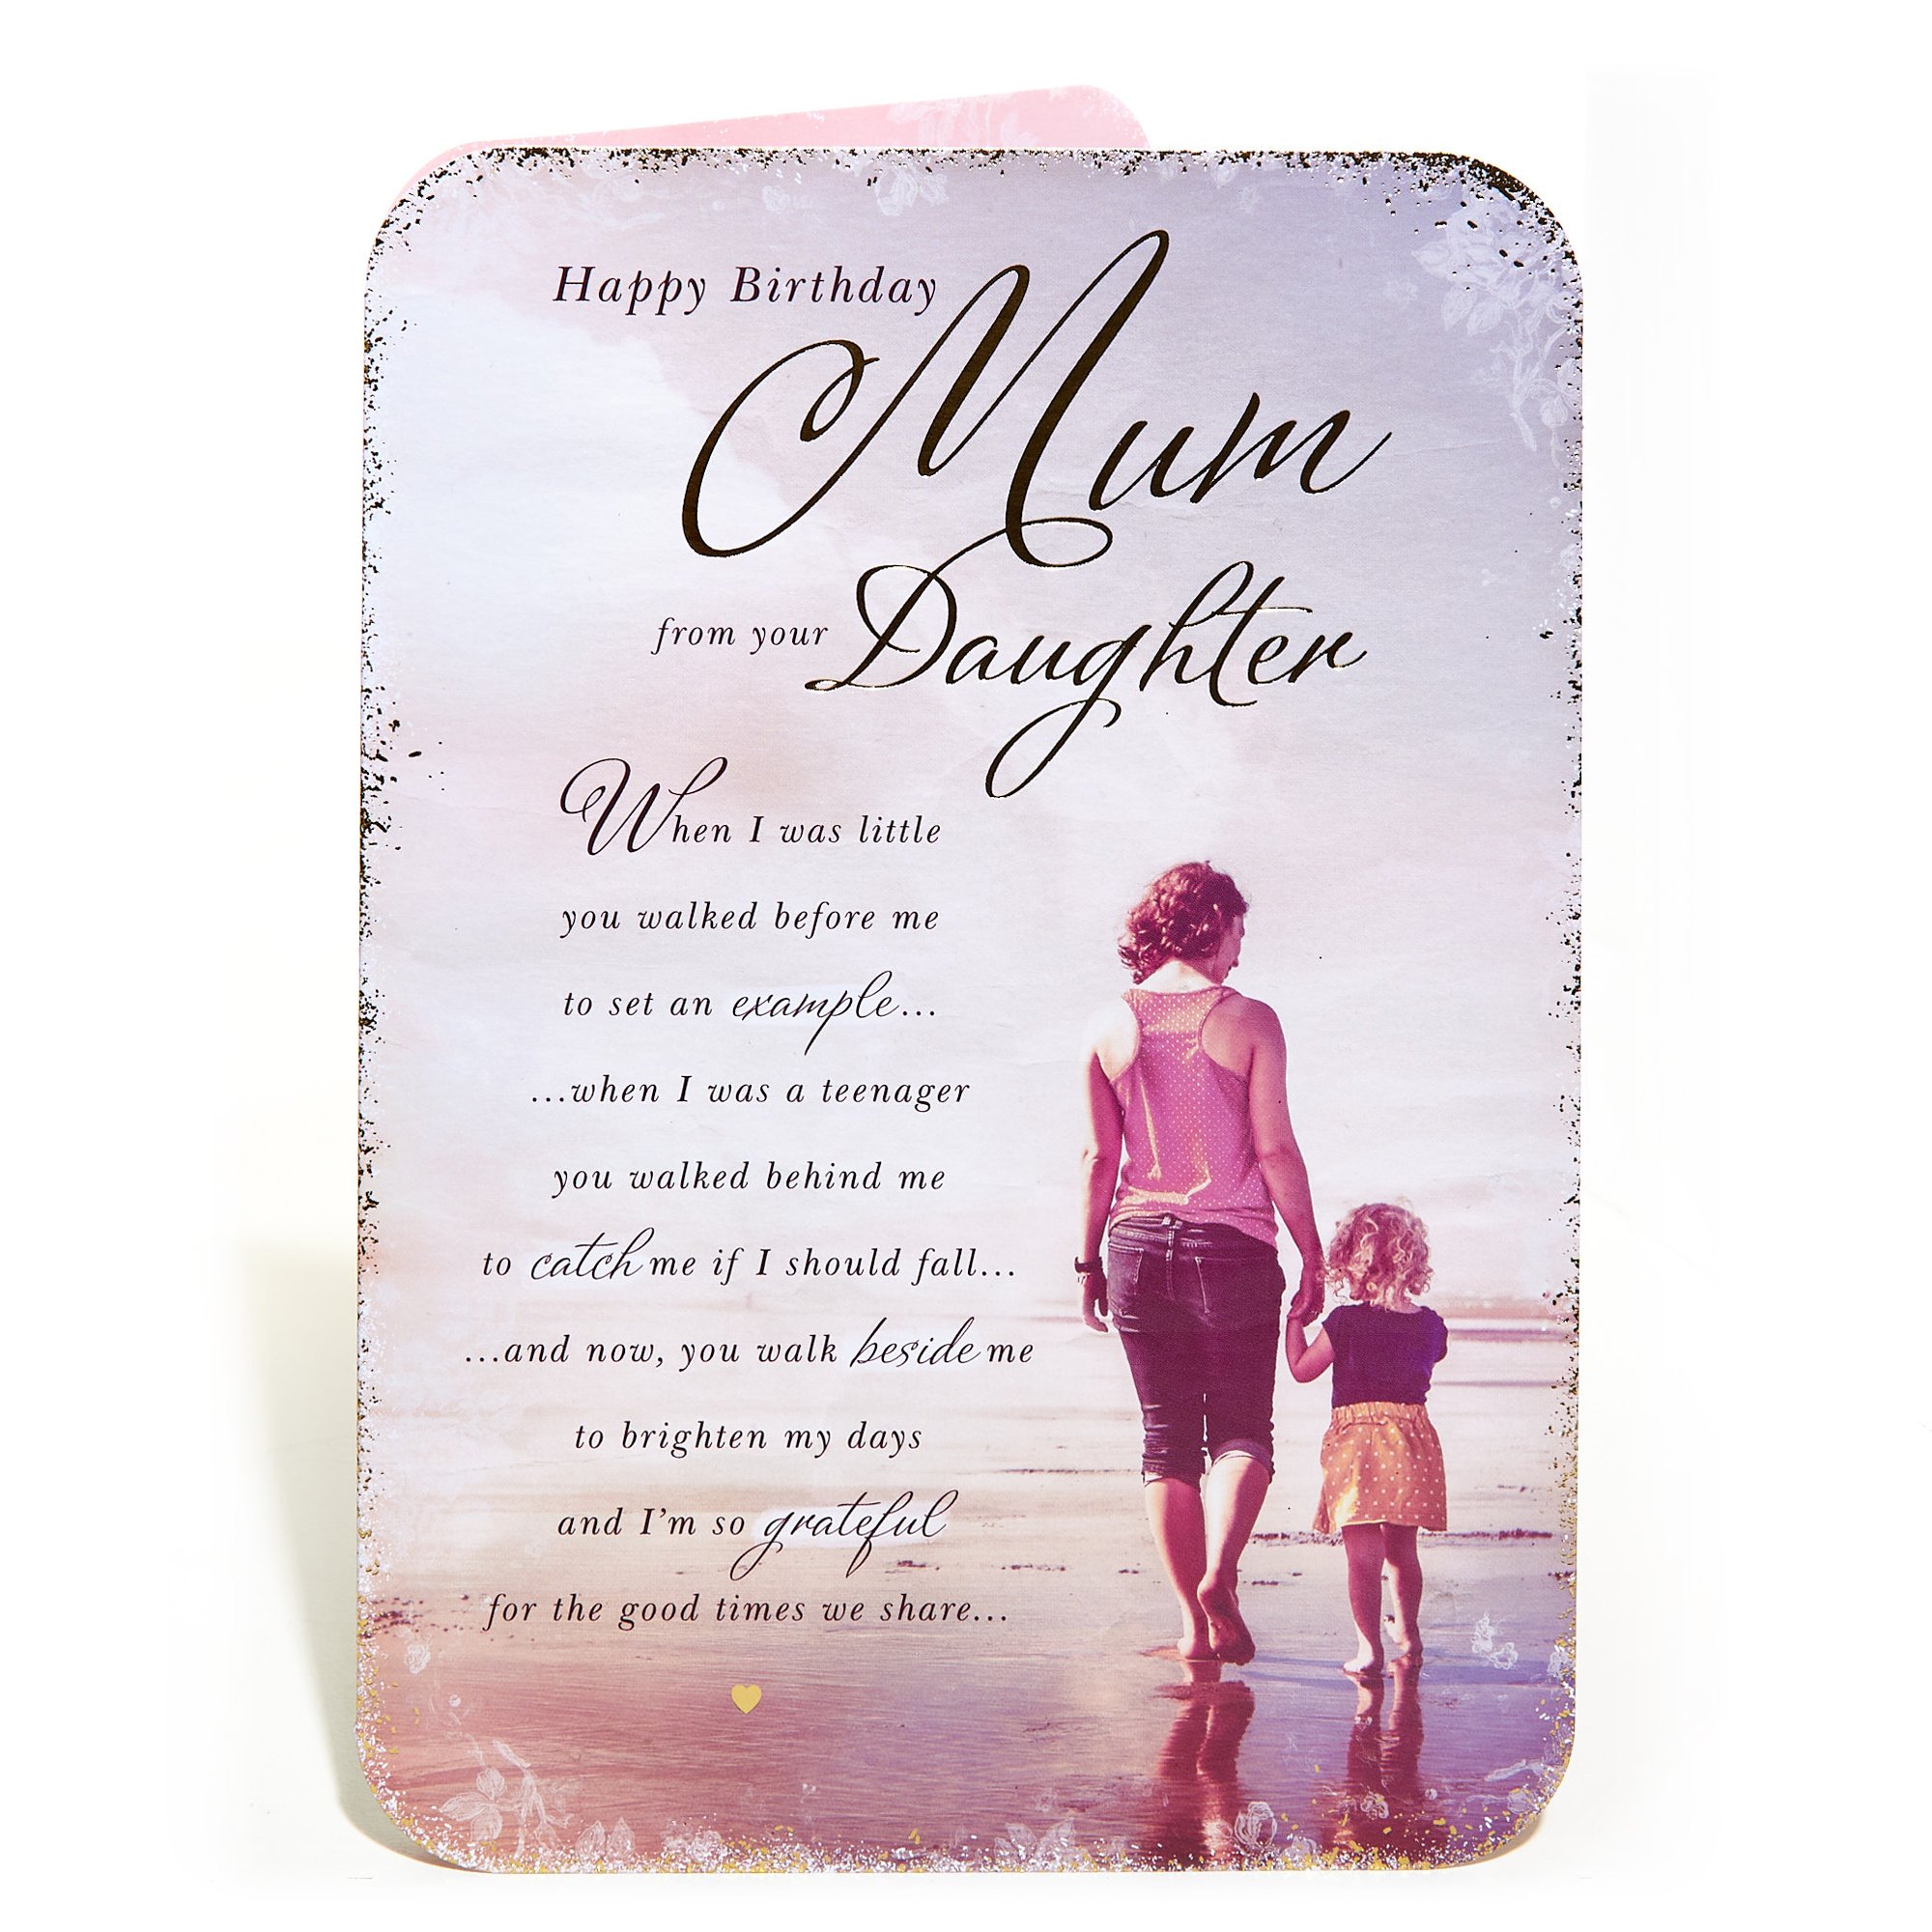 Buy Birthday Card Mum From Your Daughter For Gbp 099 Card Factory Uk 